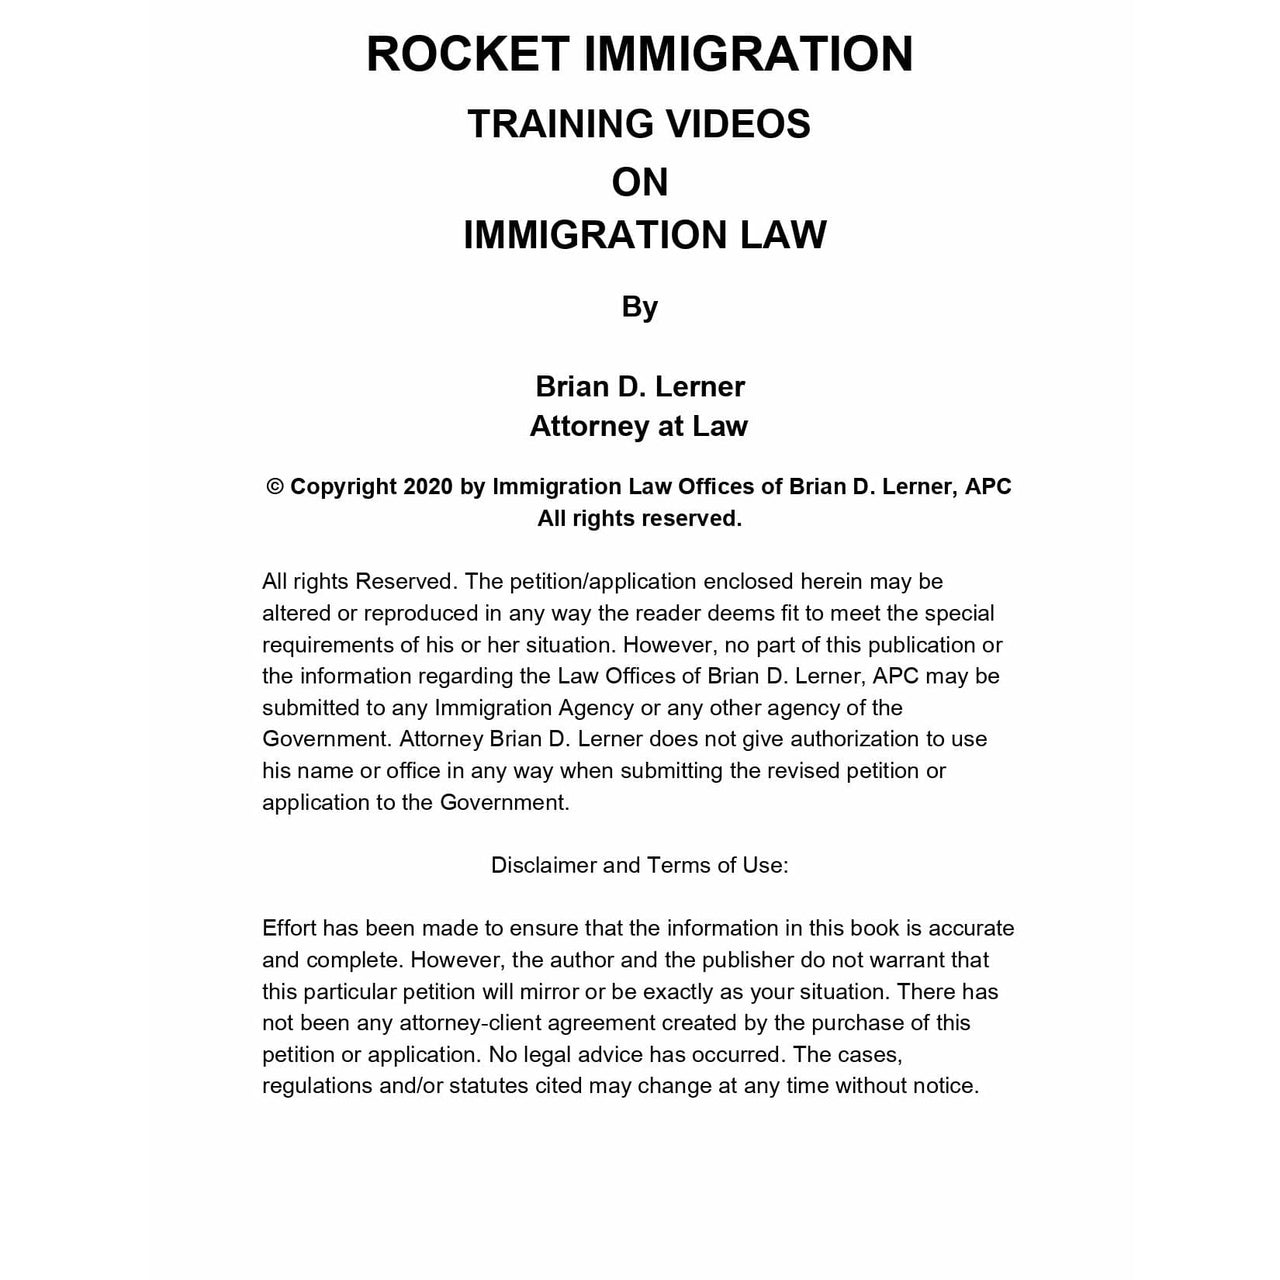 PERM Training Course Access Packet - Rocket Immigration Petitions